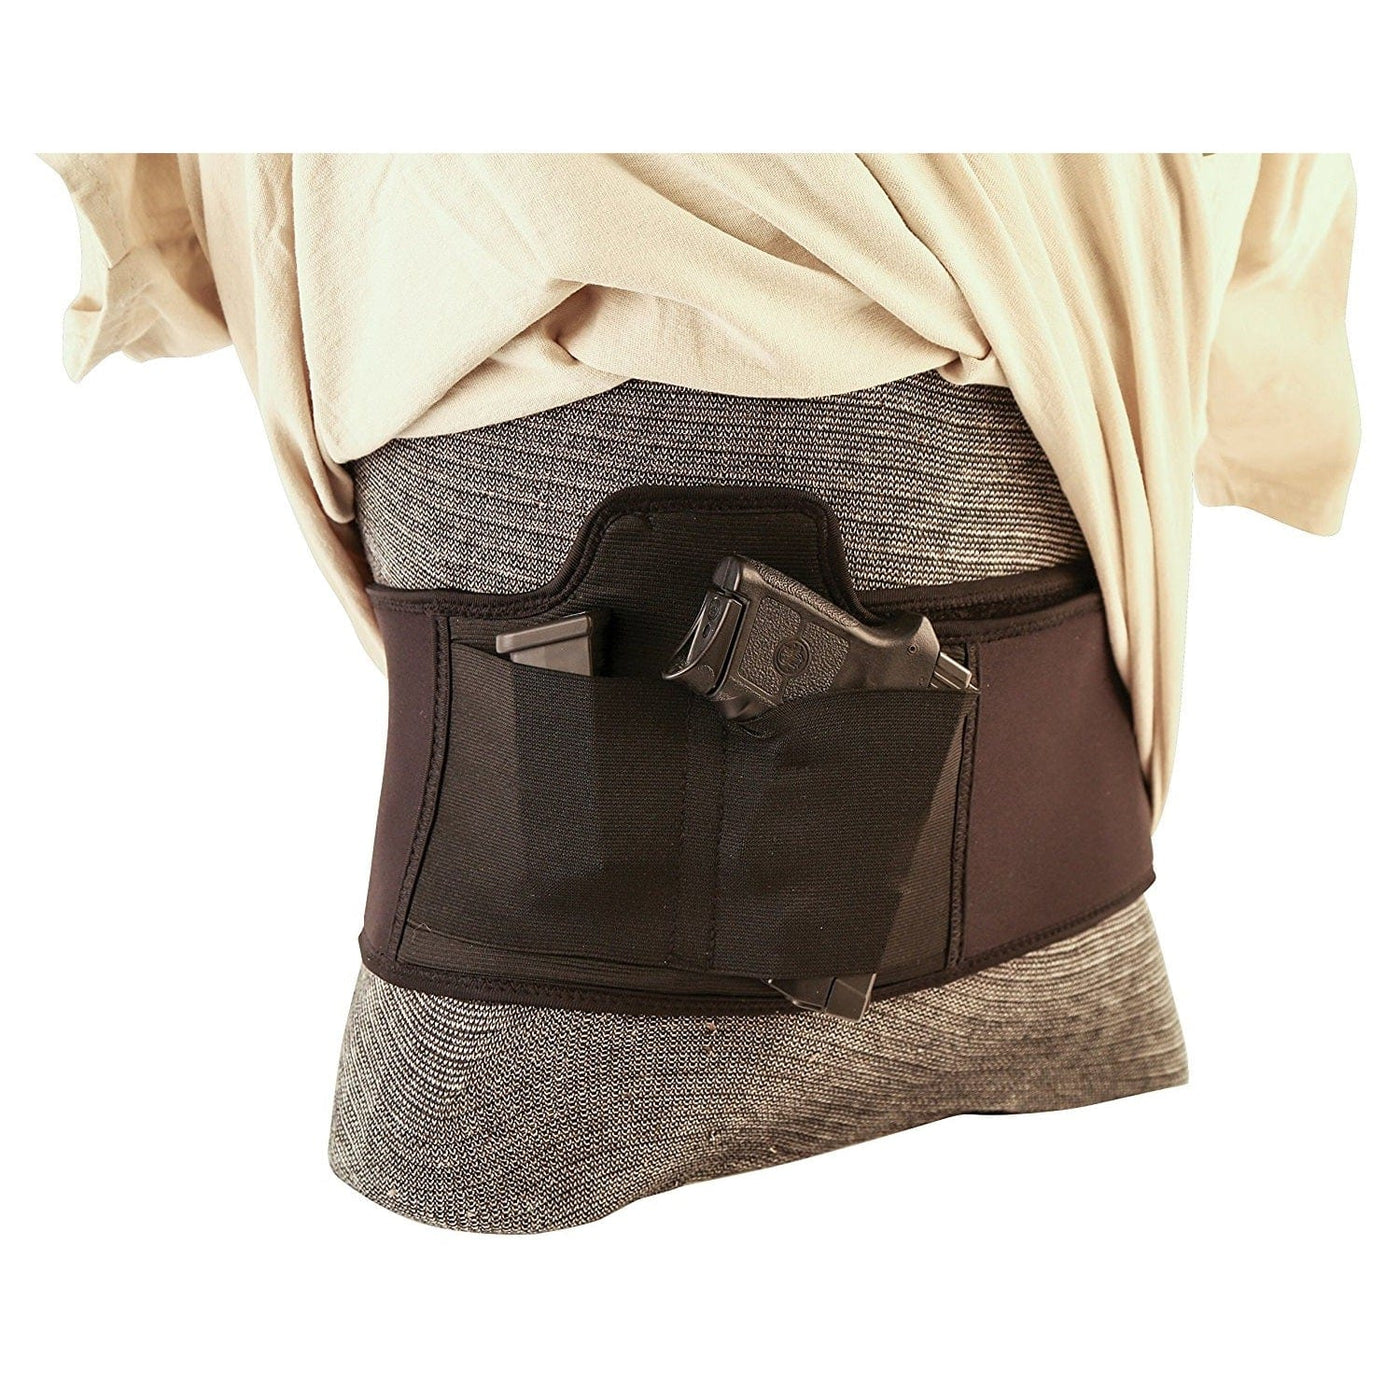 Caldwell Caldwell TAC OPS Belly Band Holster Shooting